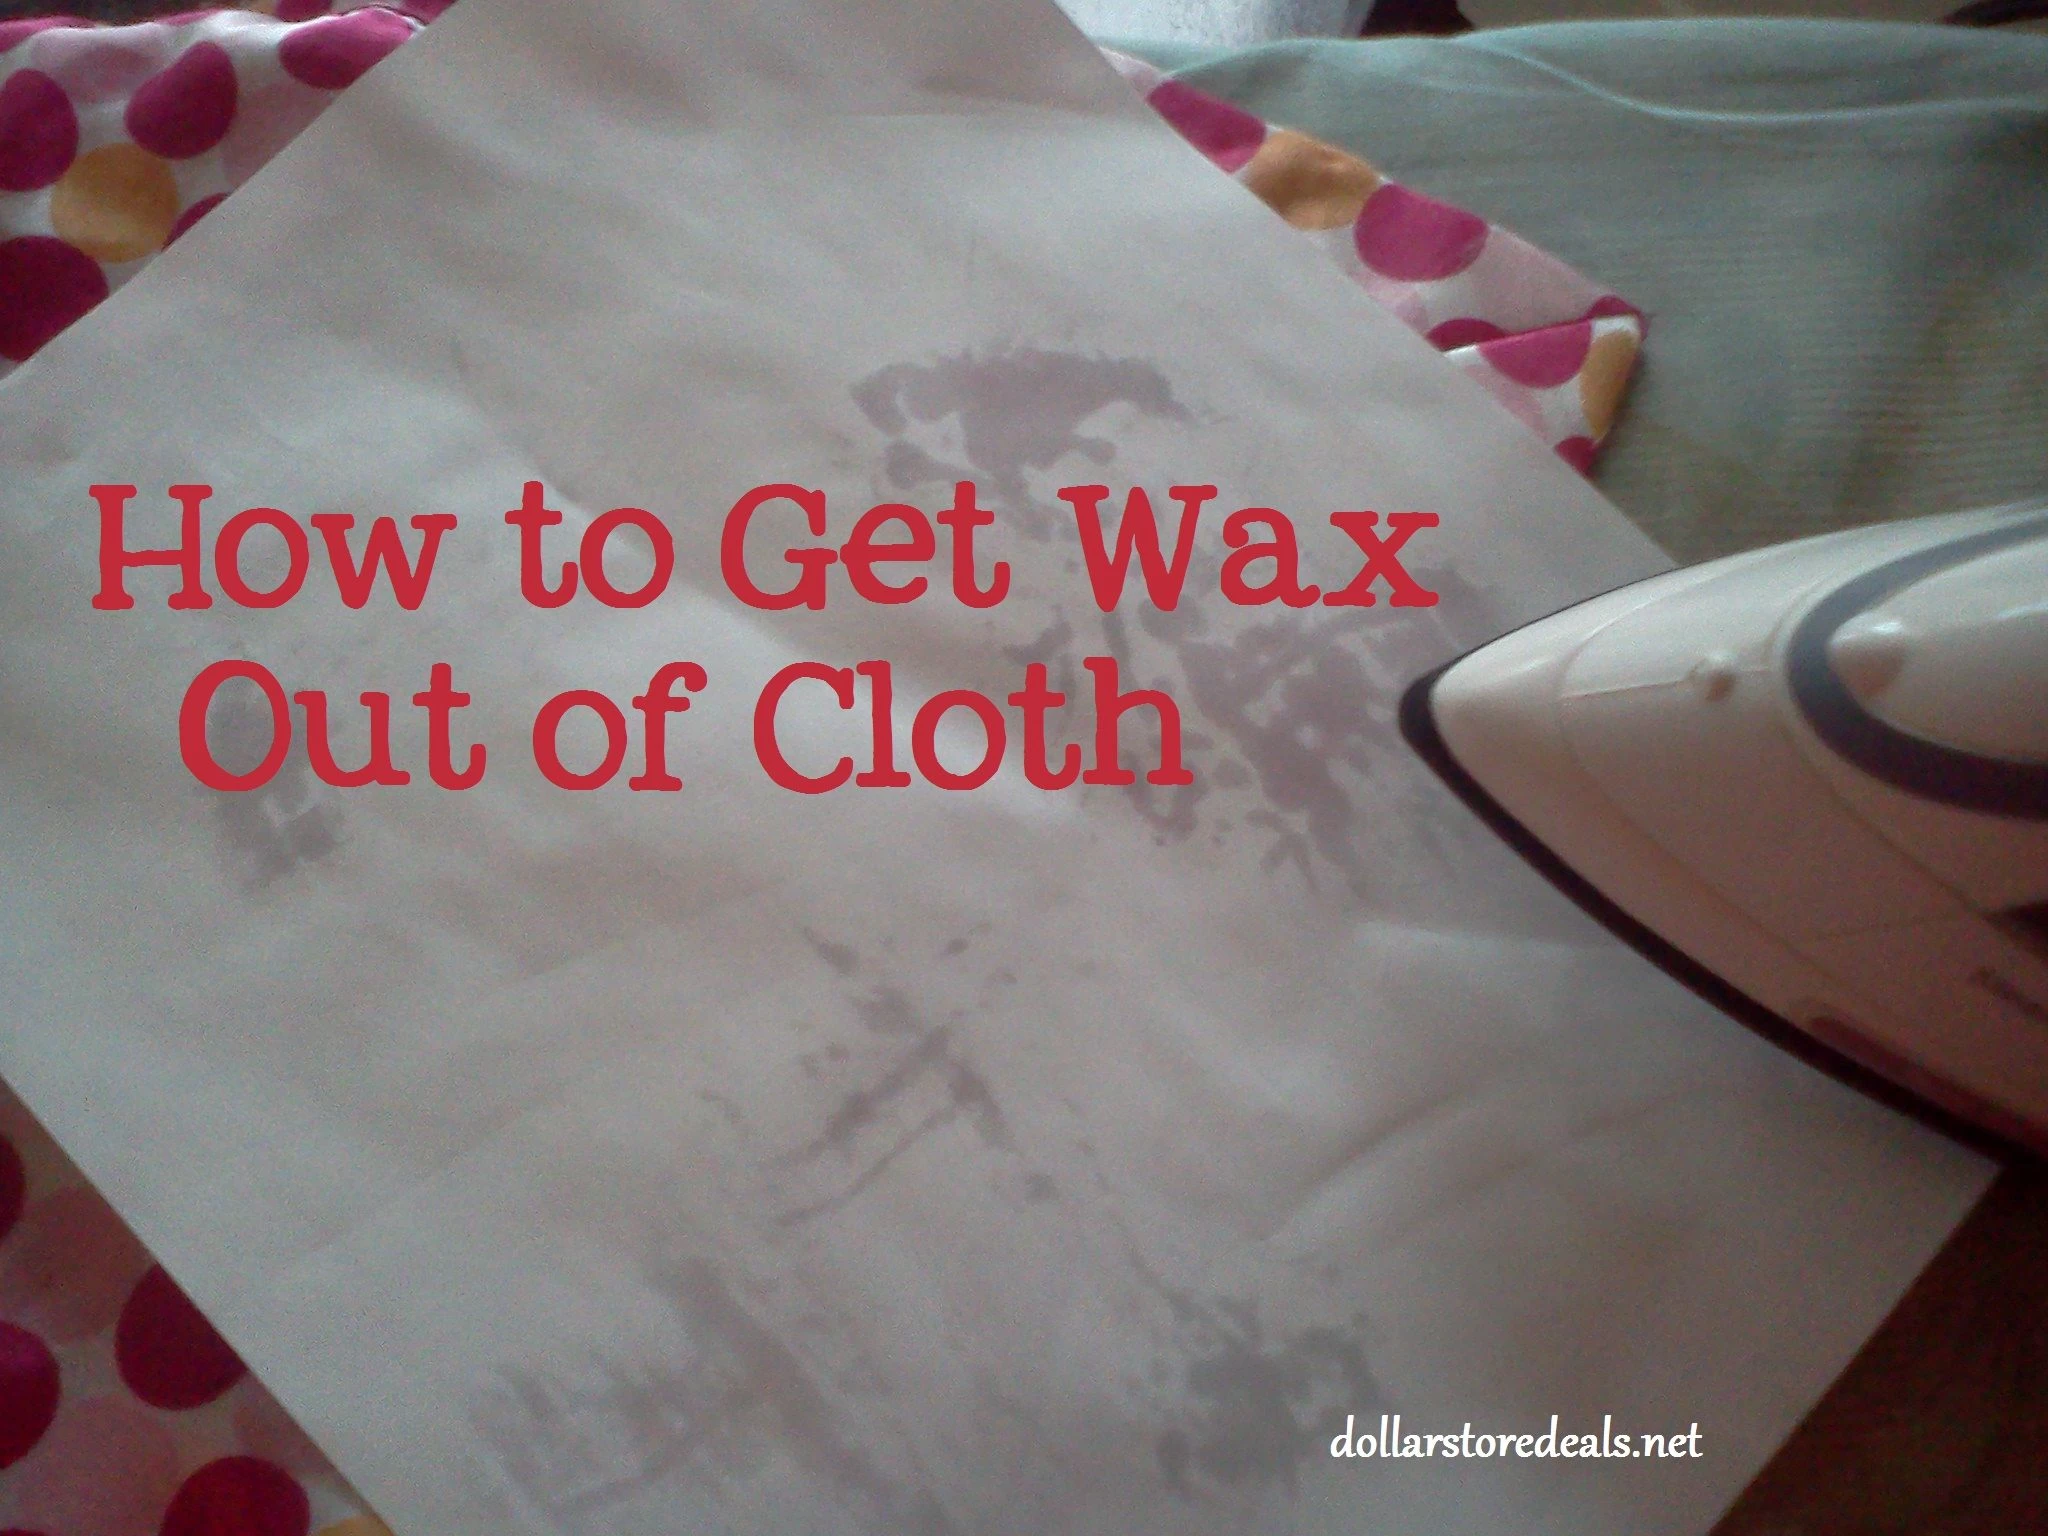 How do you remove candle wax from clothing?